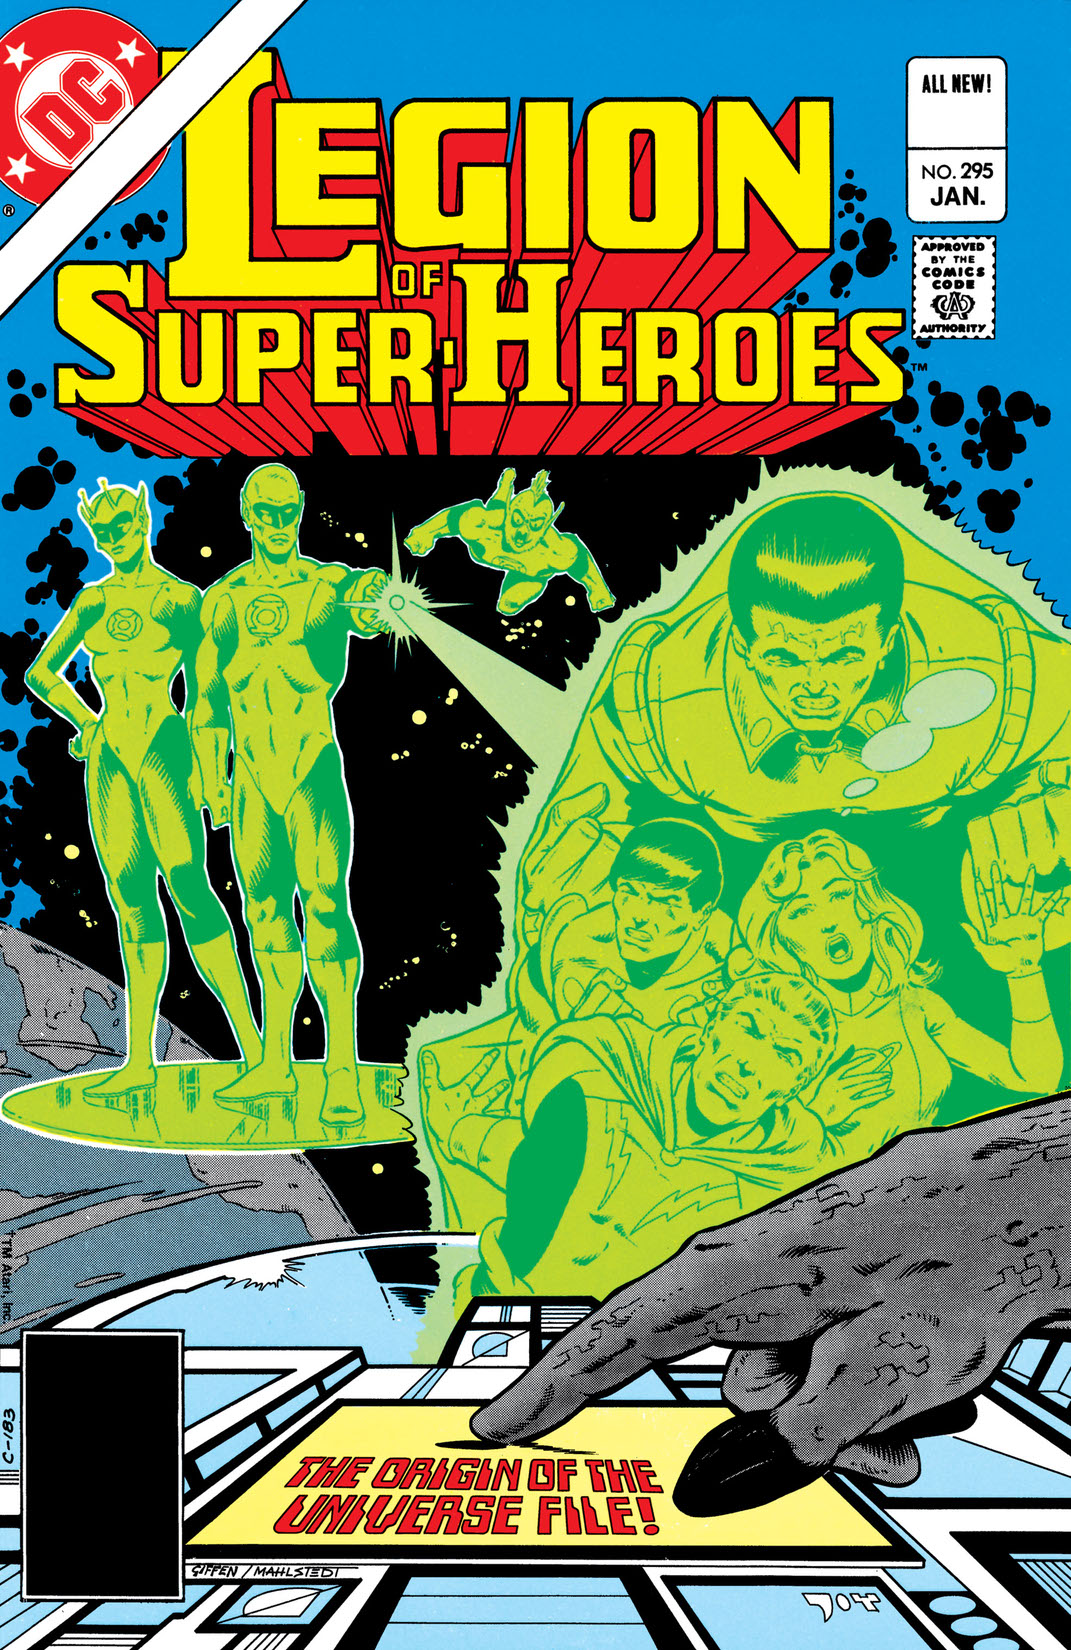 The Legion of Super-Heroes (1980-) #295 preview images